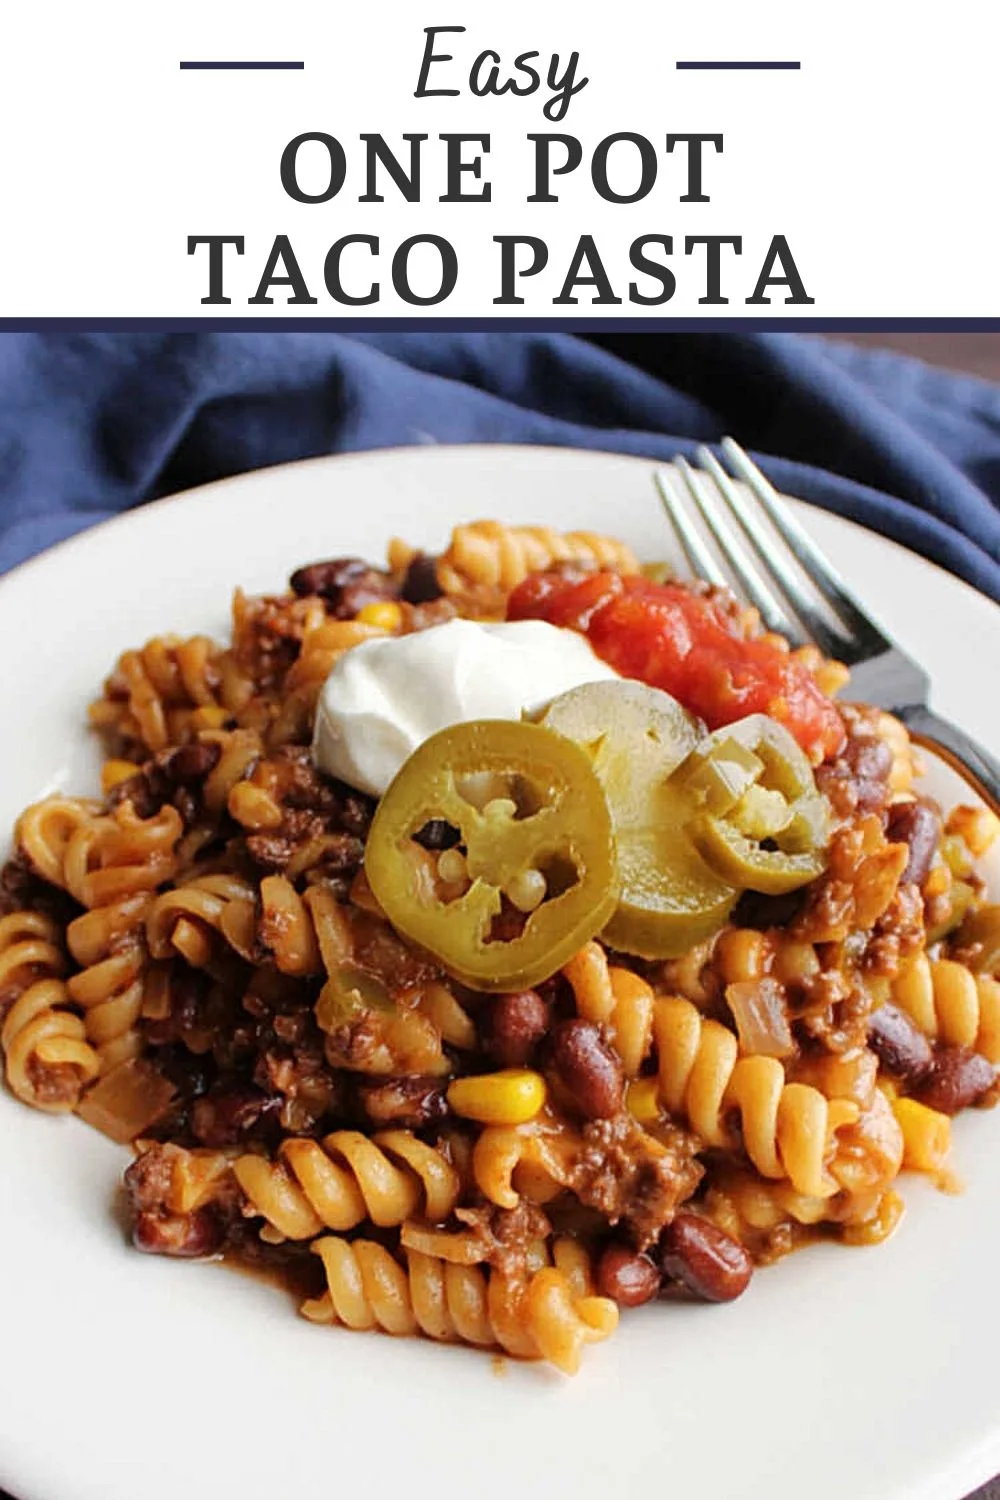 Make your whole dinner in one pot and in about a half hour. This taco pasta is quick, easy and full of veggies. It is a complete meal and there's only one pot to clean!